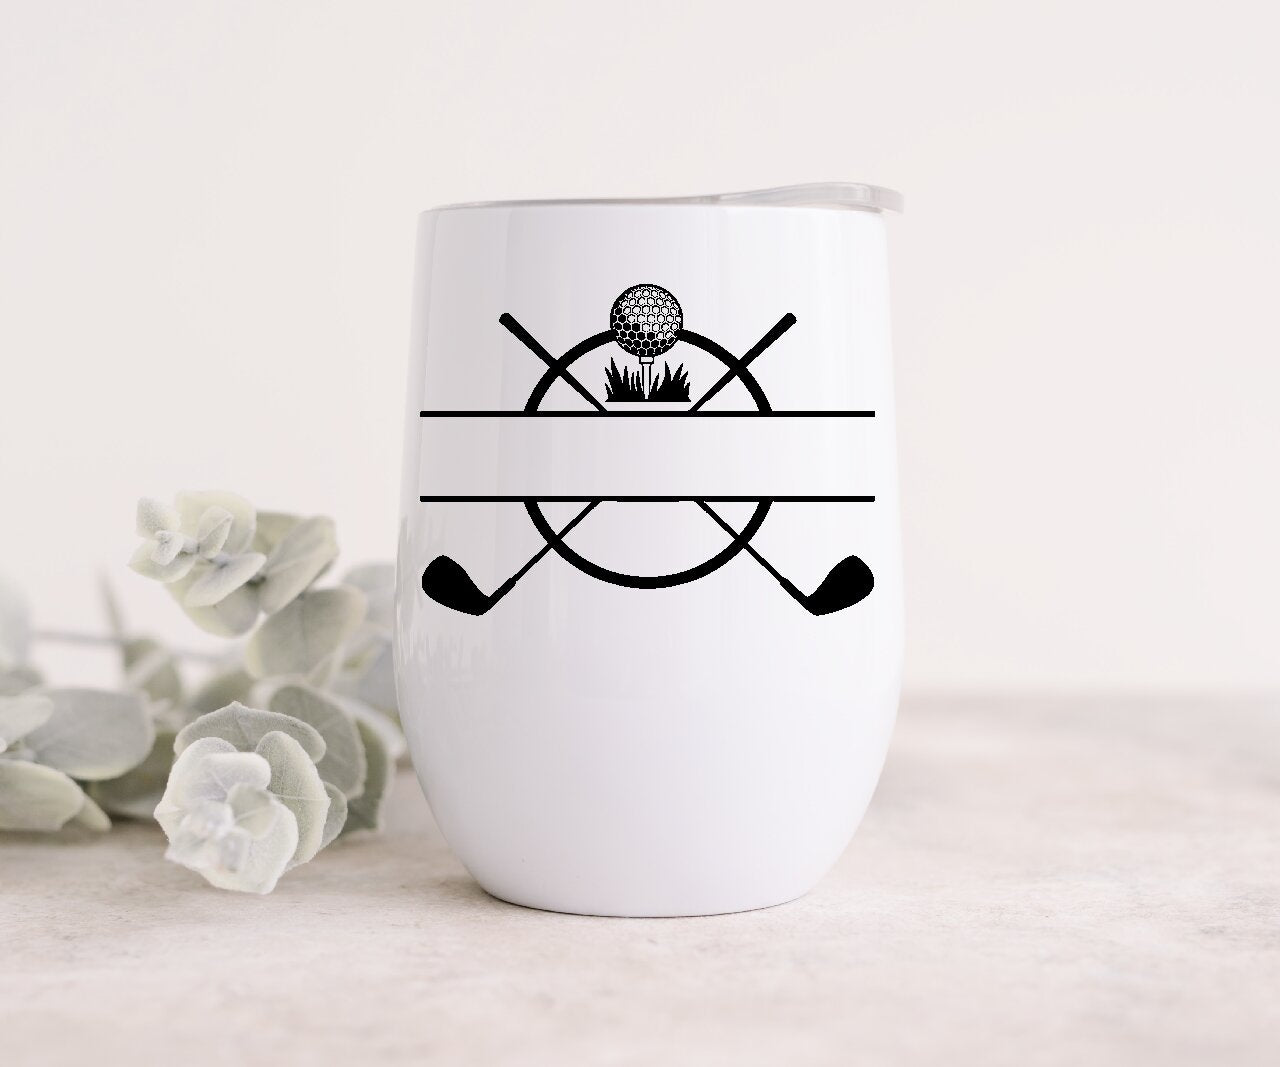 Golf Clubs & Ball 3 - Wine Tumbler  (Personalised with your name).